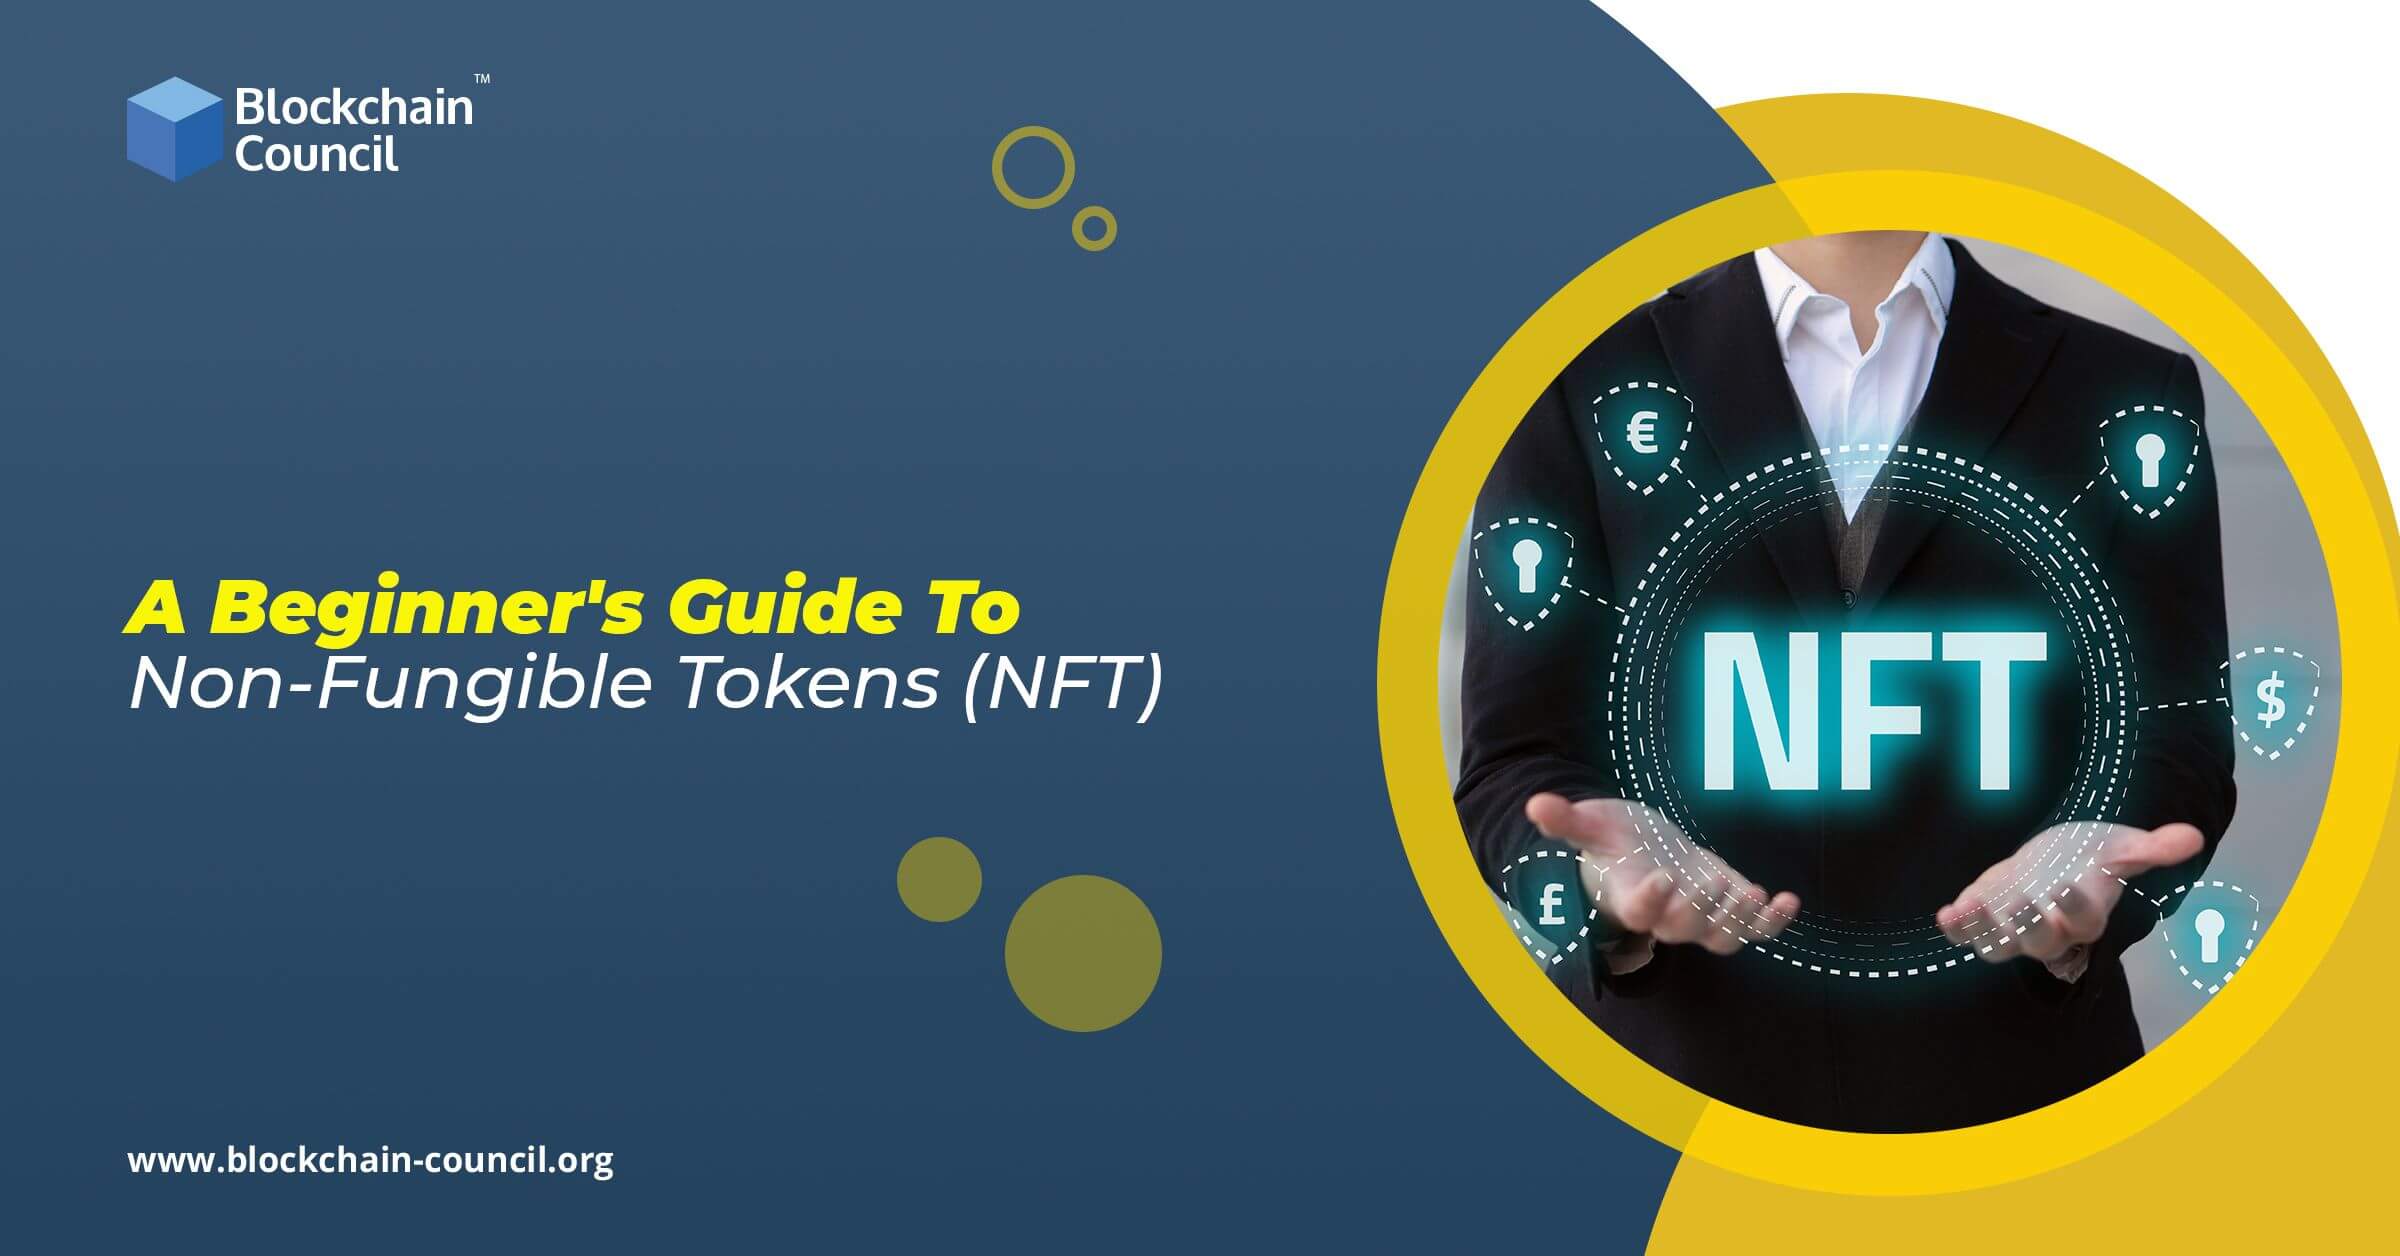 A Beginner’s Guide to Non-Fungible Tokens (NFT)